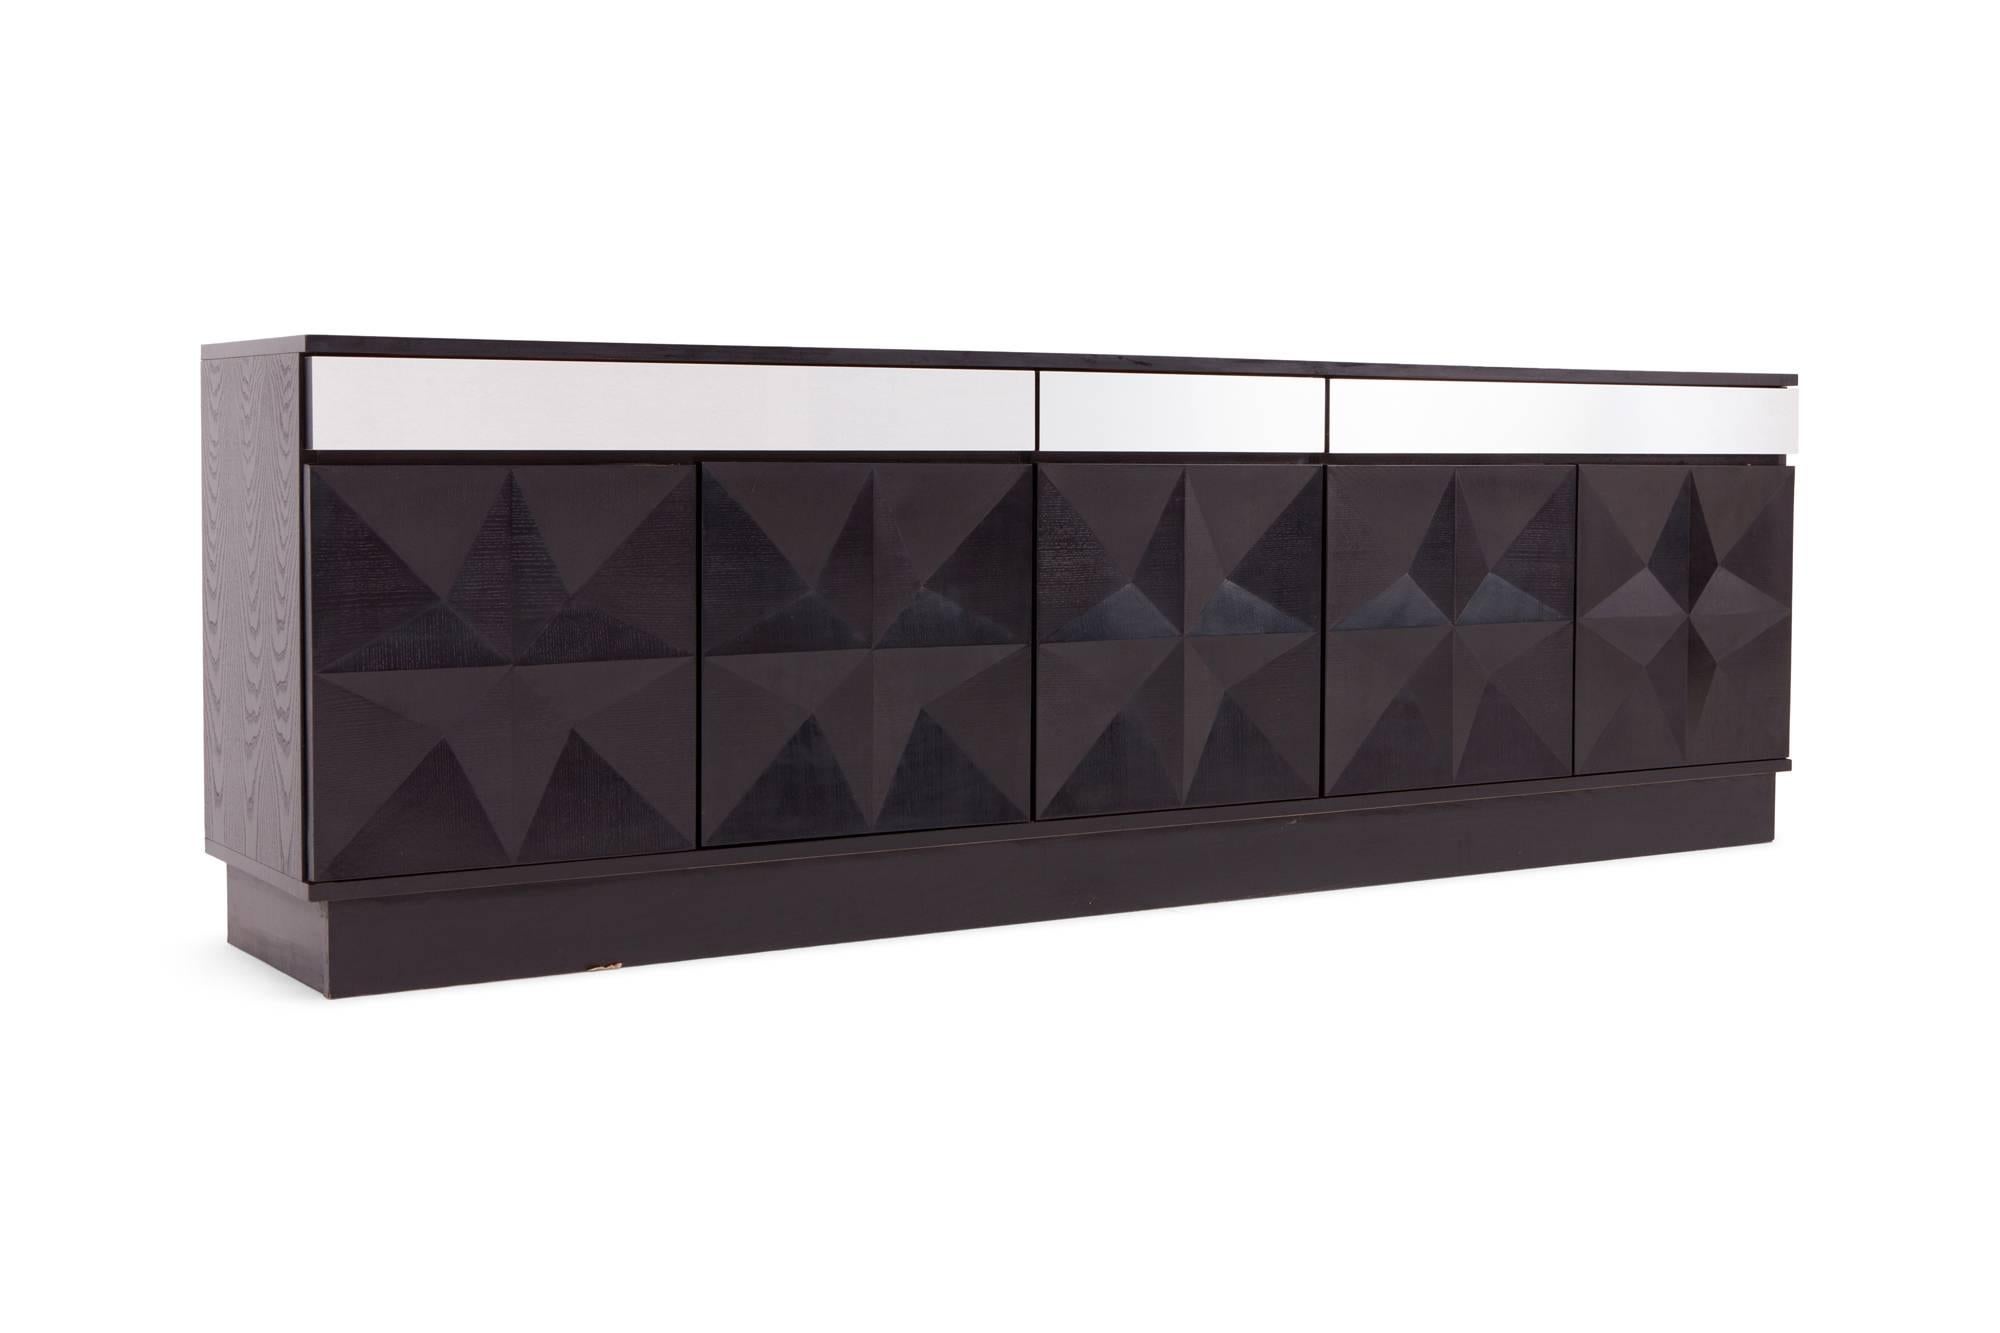 Diamond Brutalist sideboard, Belgium, 1960s

The cabinet has five decorative geometric door panels. Above the doors are three drawers; two larger and one small one. The drawers are finished with brushed steel , giving this piece a modern